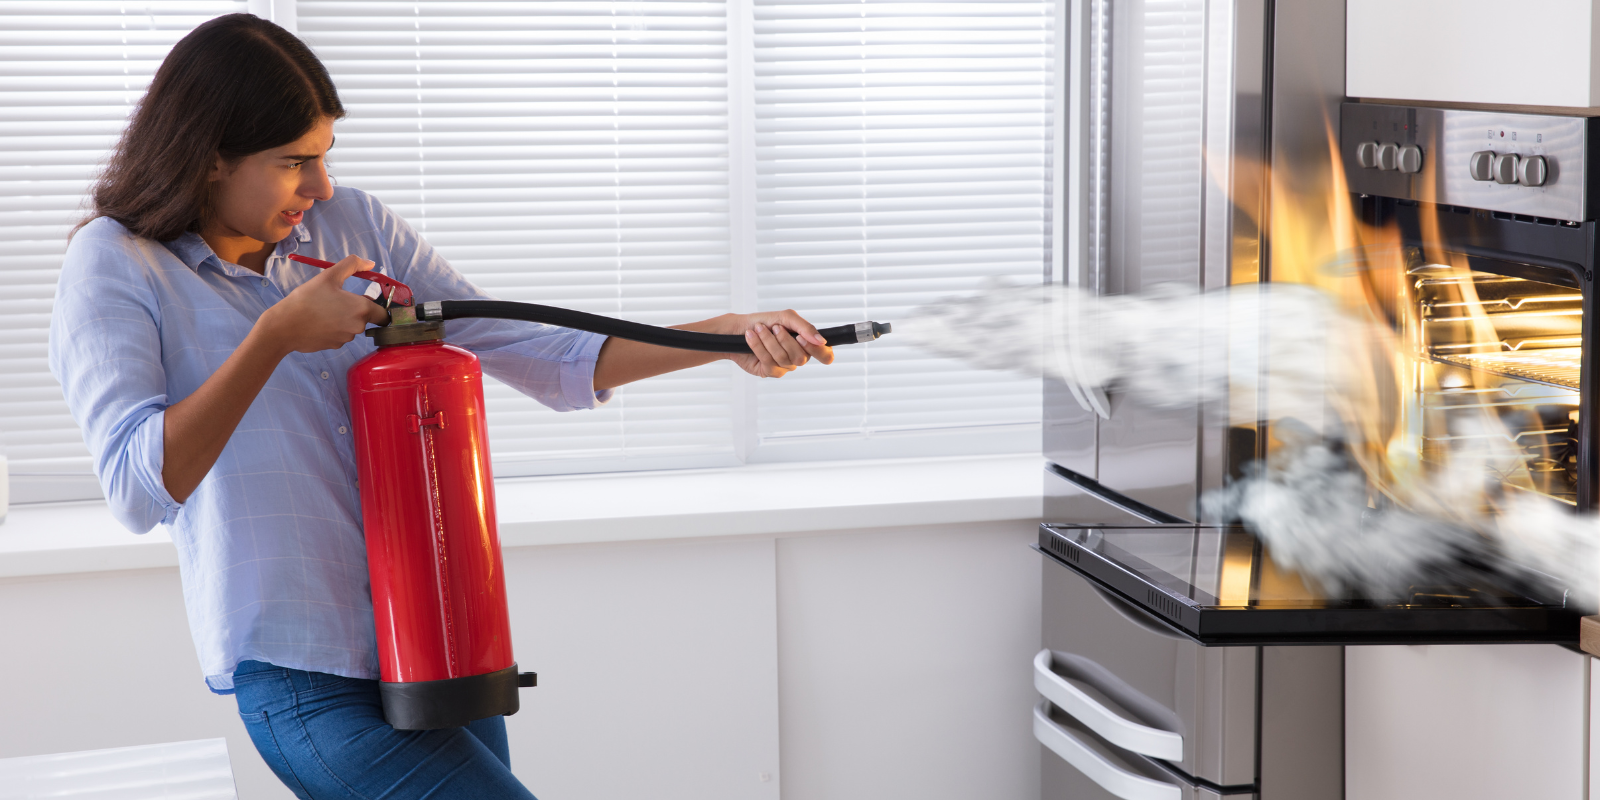 What To Do When My Condo Is Fire Damaged? Must-Know Tips